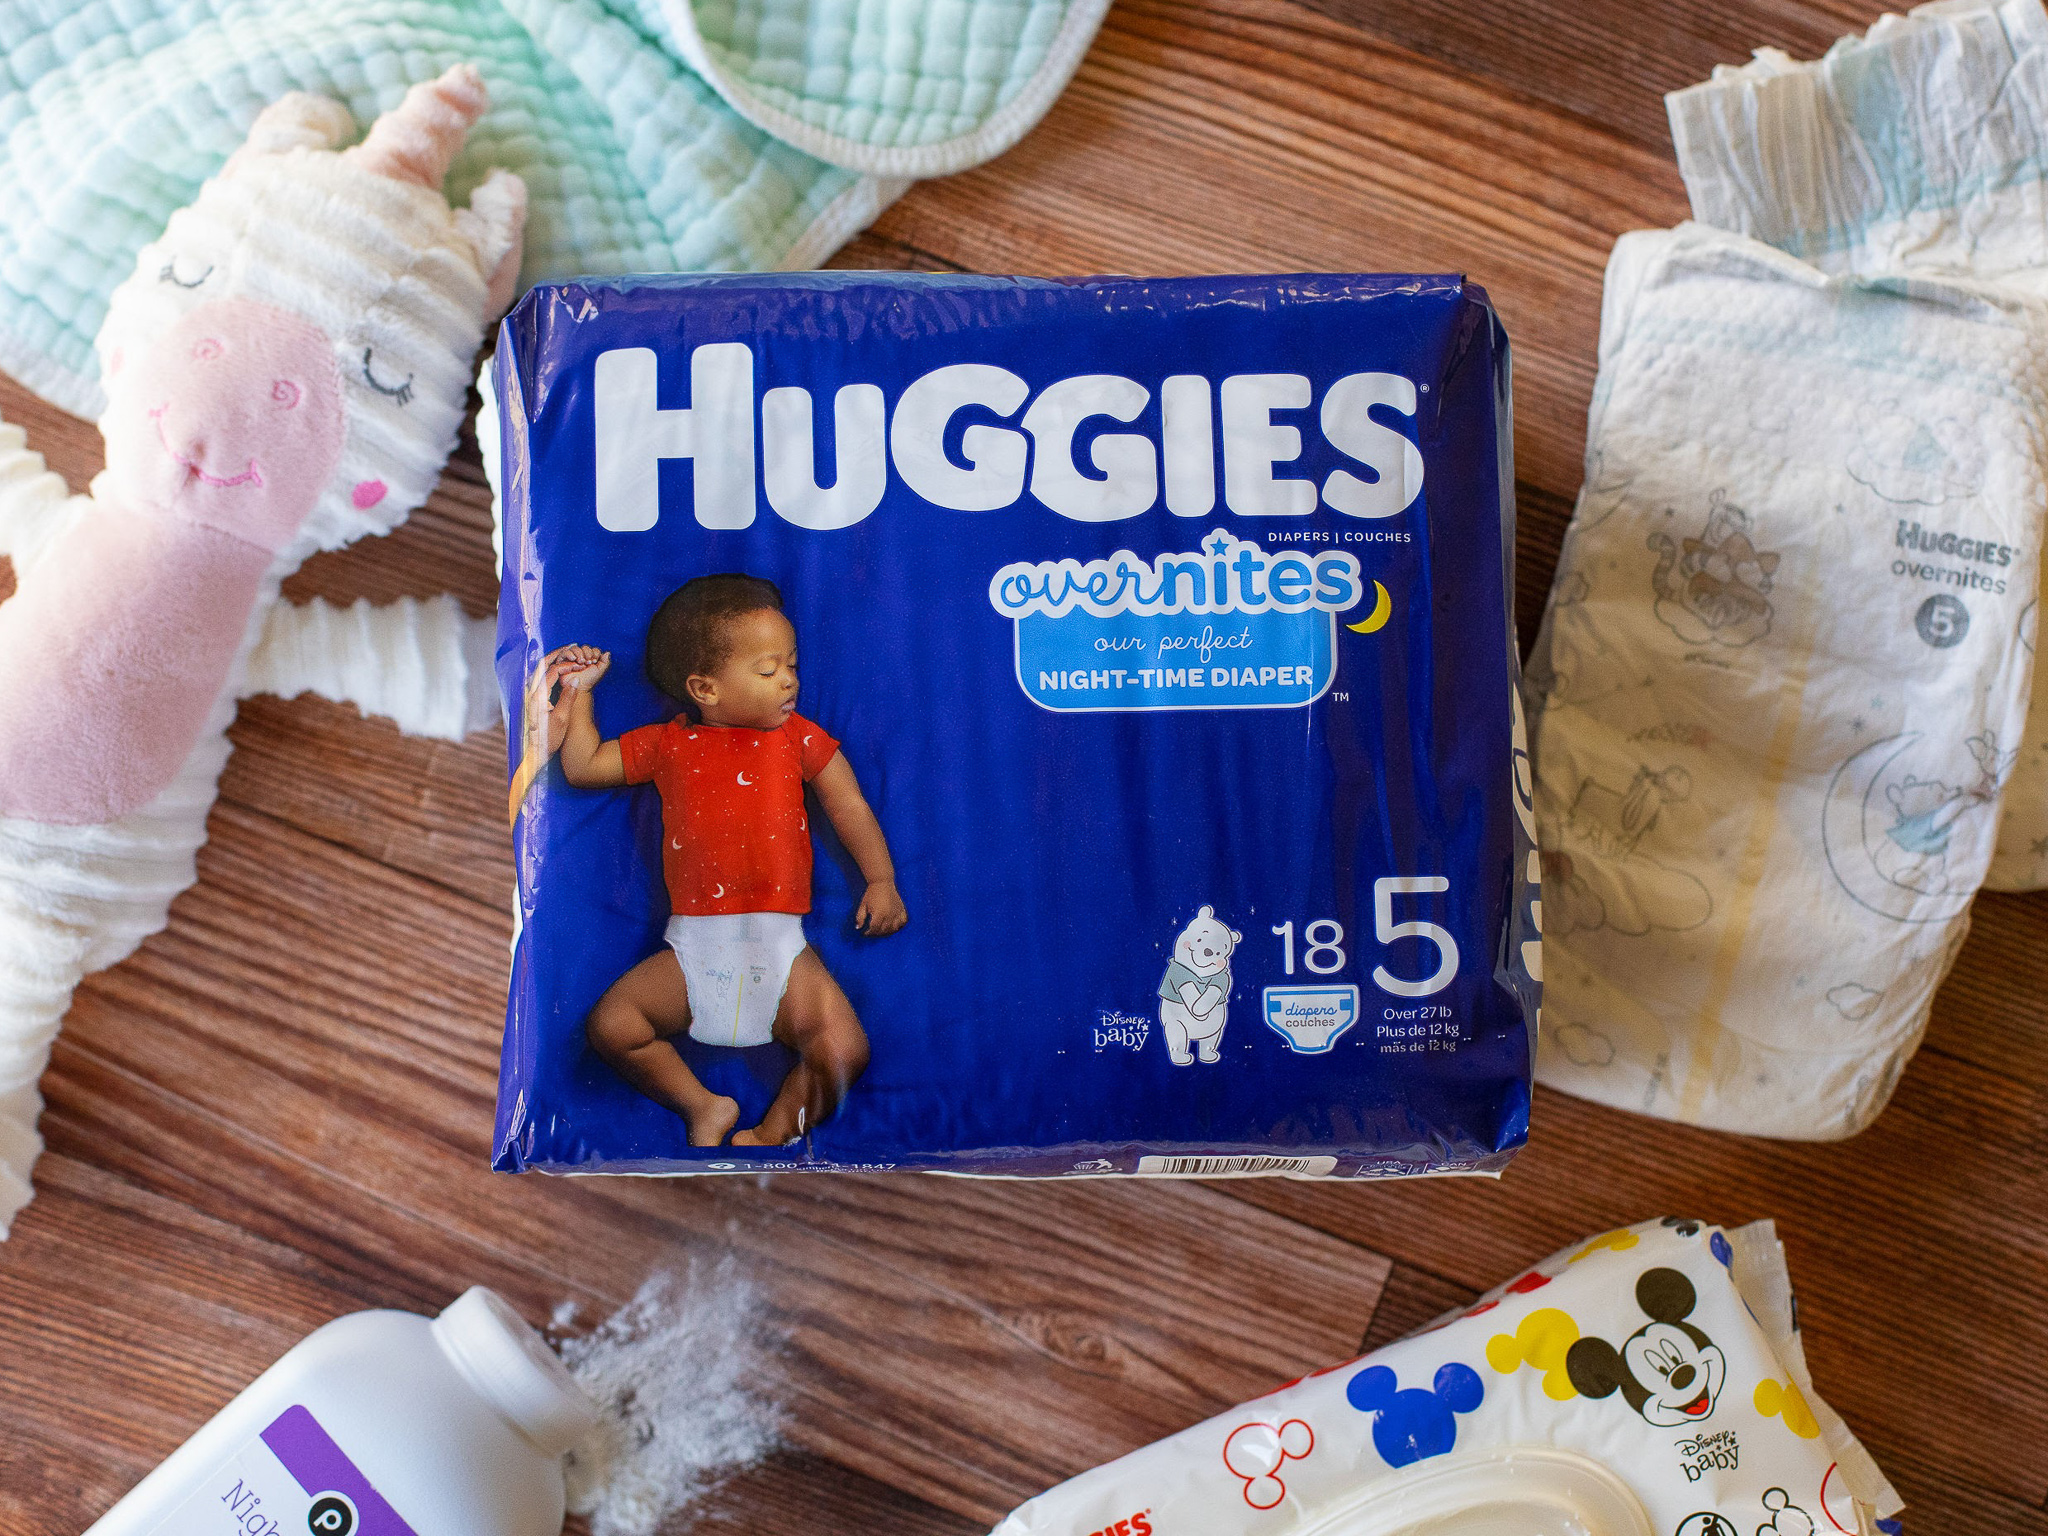 Grab Huggies Overnites Diapers This Week At Publix - Great Time To Stock Up! on I Heart Publix